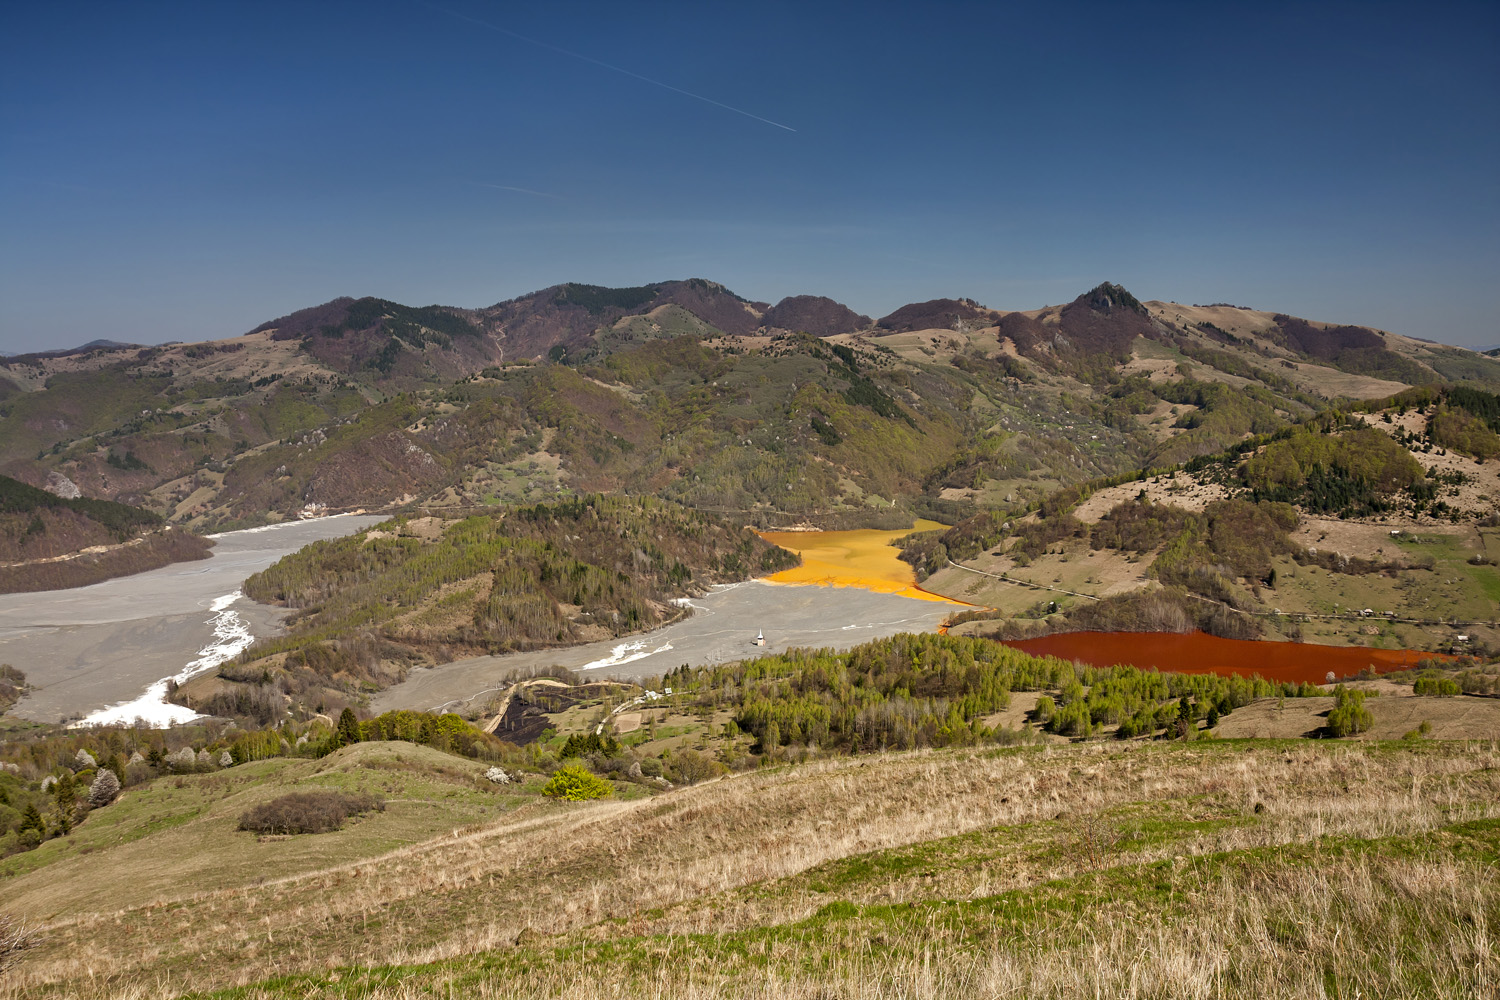 The tailings pond of the Rosia Poieni copper mine, a mining project similar to the one proposed in Rosia Montana.